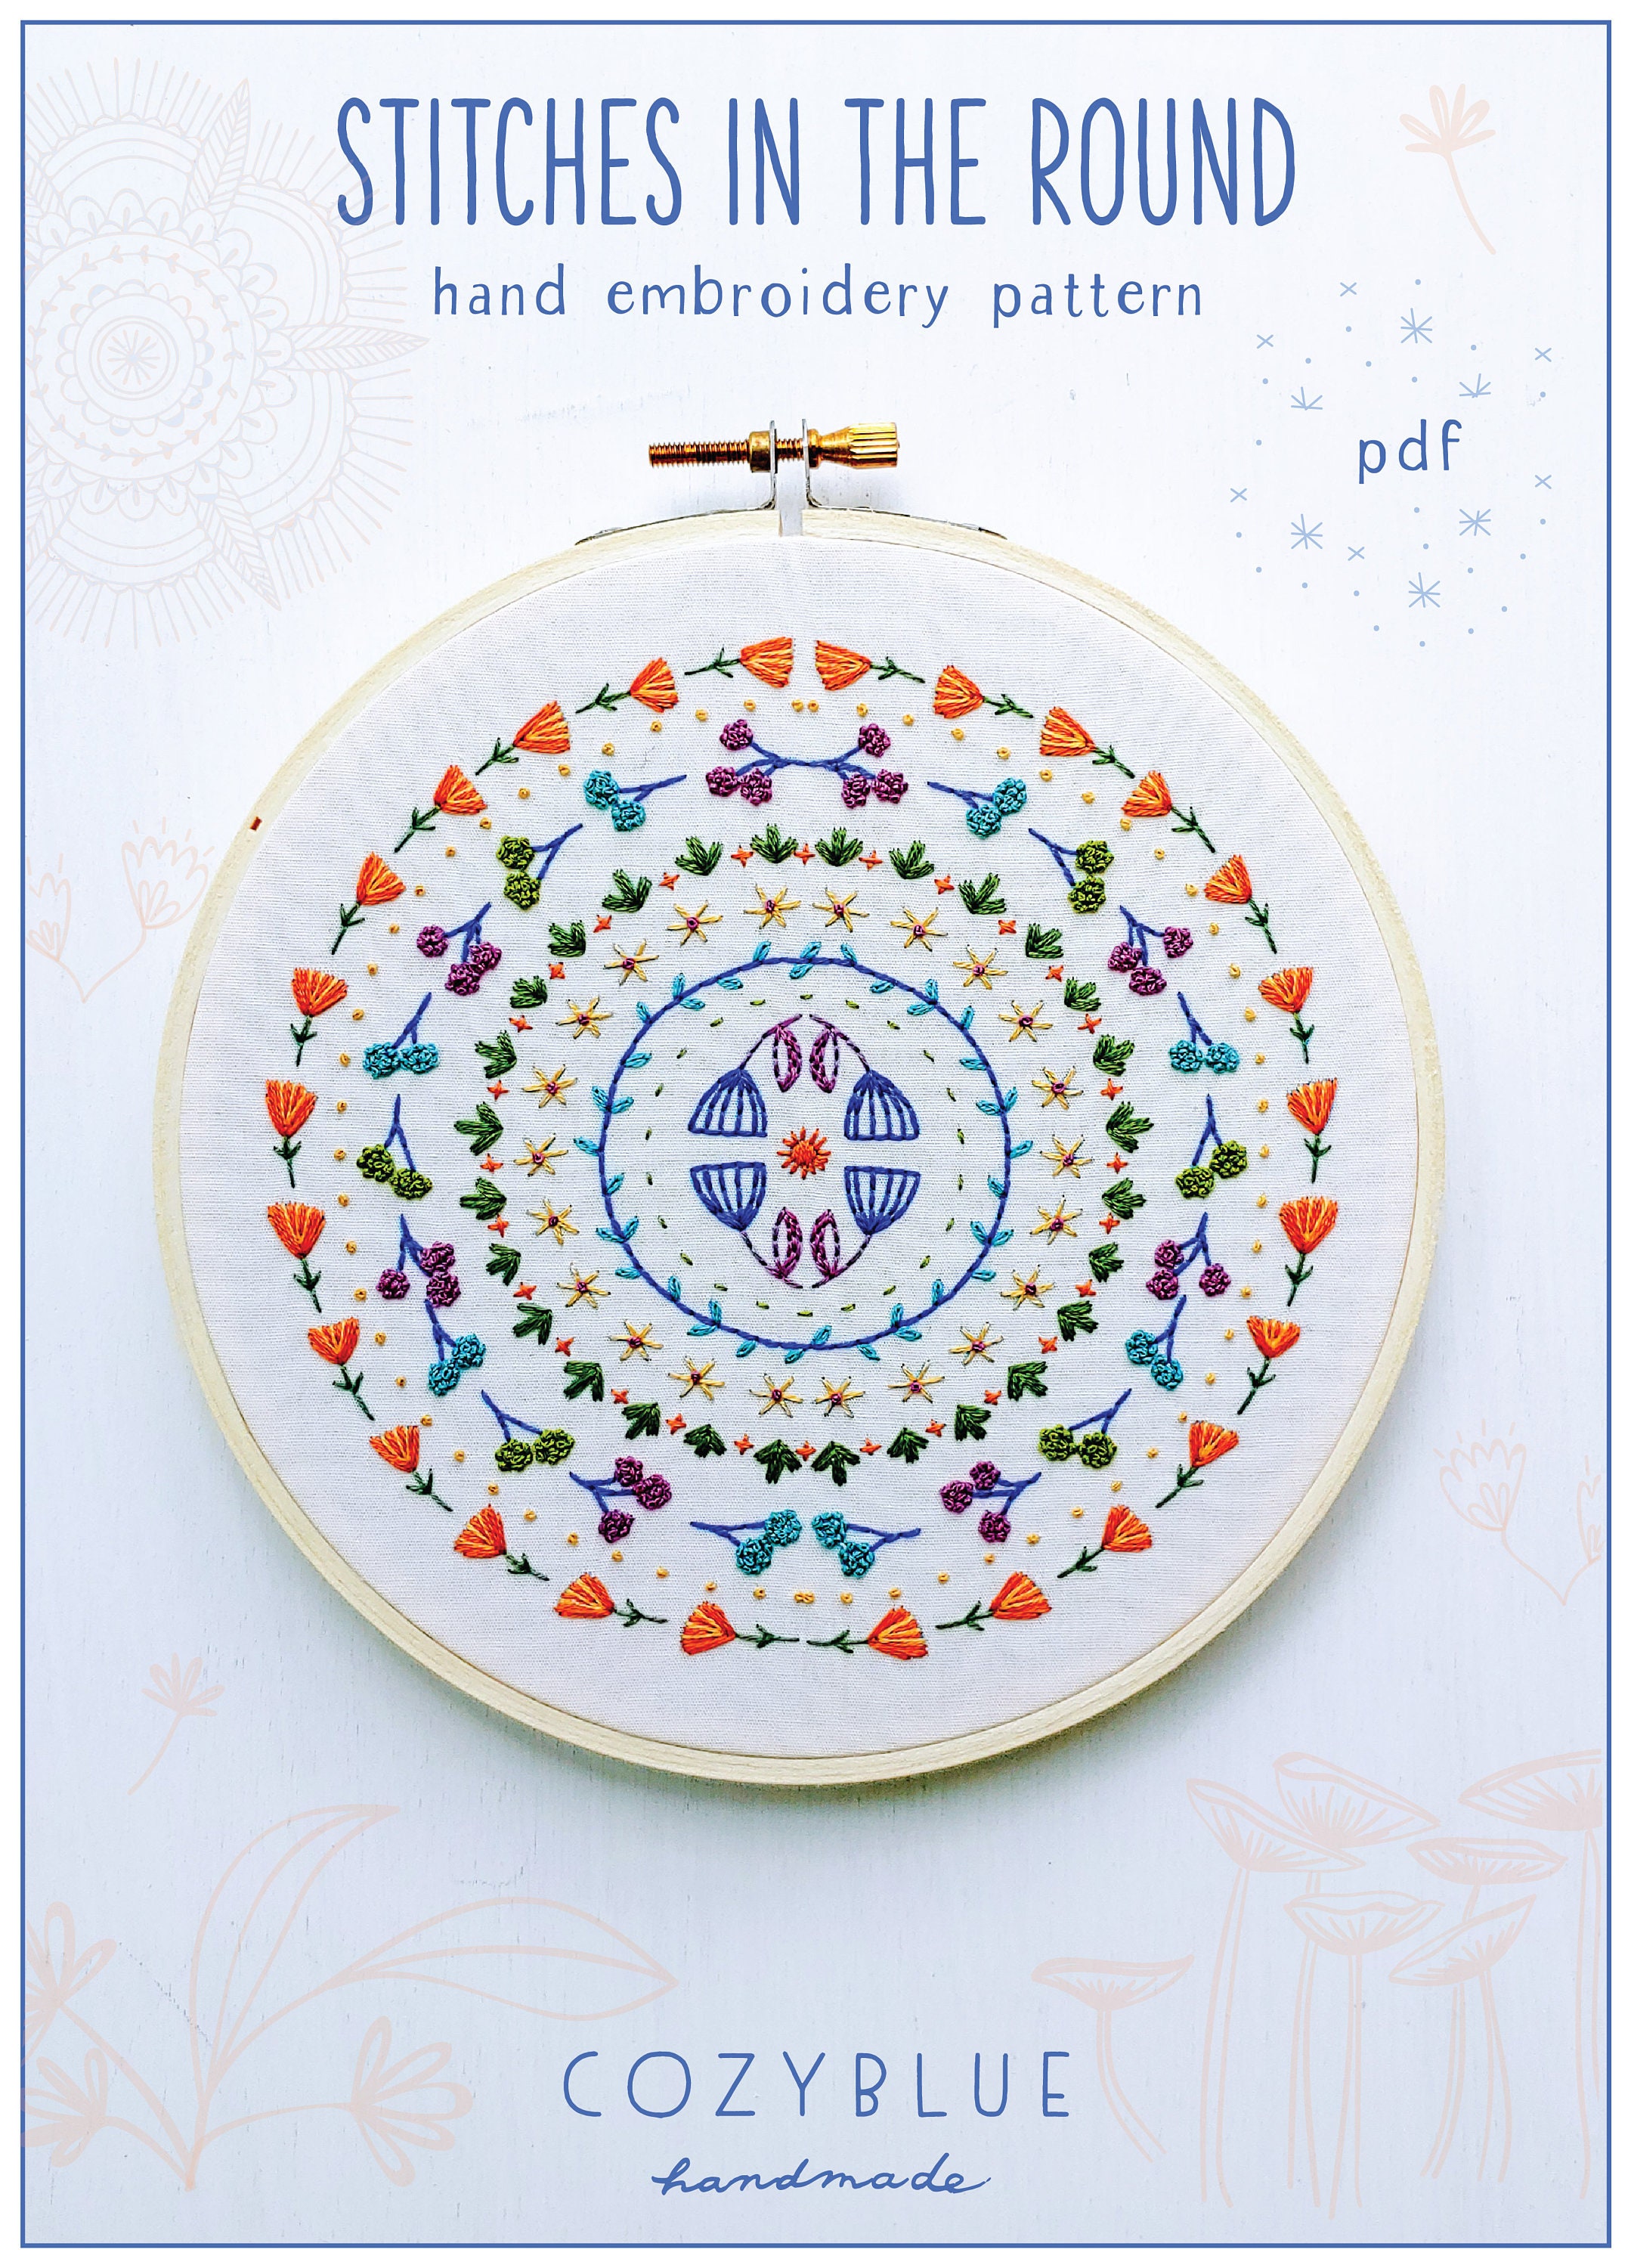 STITCHES in the ROUND Pdf Embroidery Pattern, Embroidery Hoop Art, Hand  Embroidery, Vines and Lines, Folk Art Style, Floral Design, Circle -   Canada